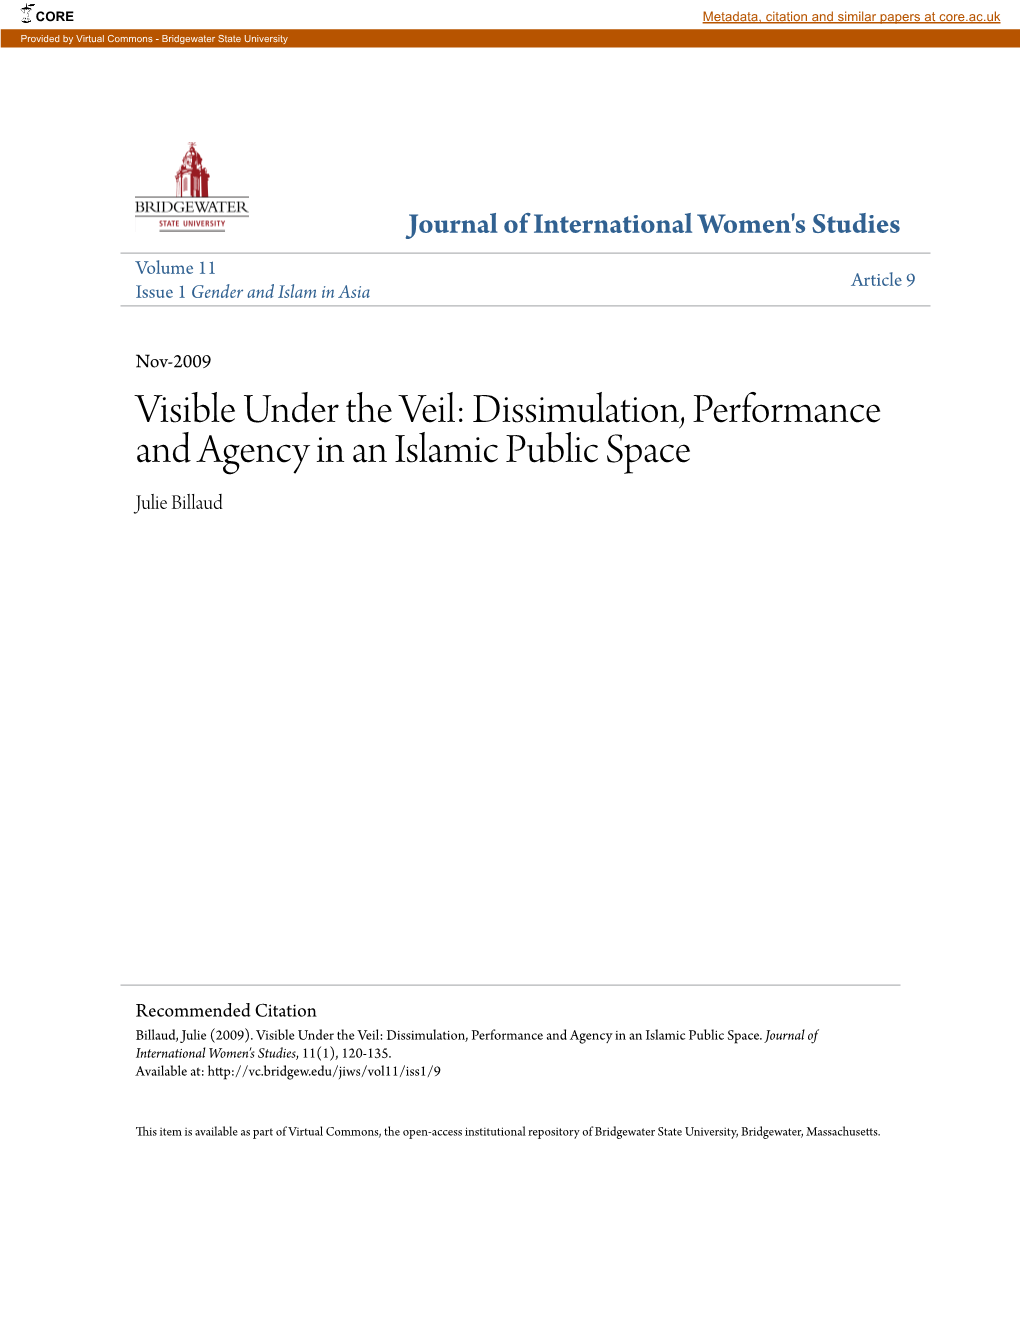 Visible Under the Veil: Dissimulation, Performance and Agency in an Islamic Public Space Julie Billaud